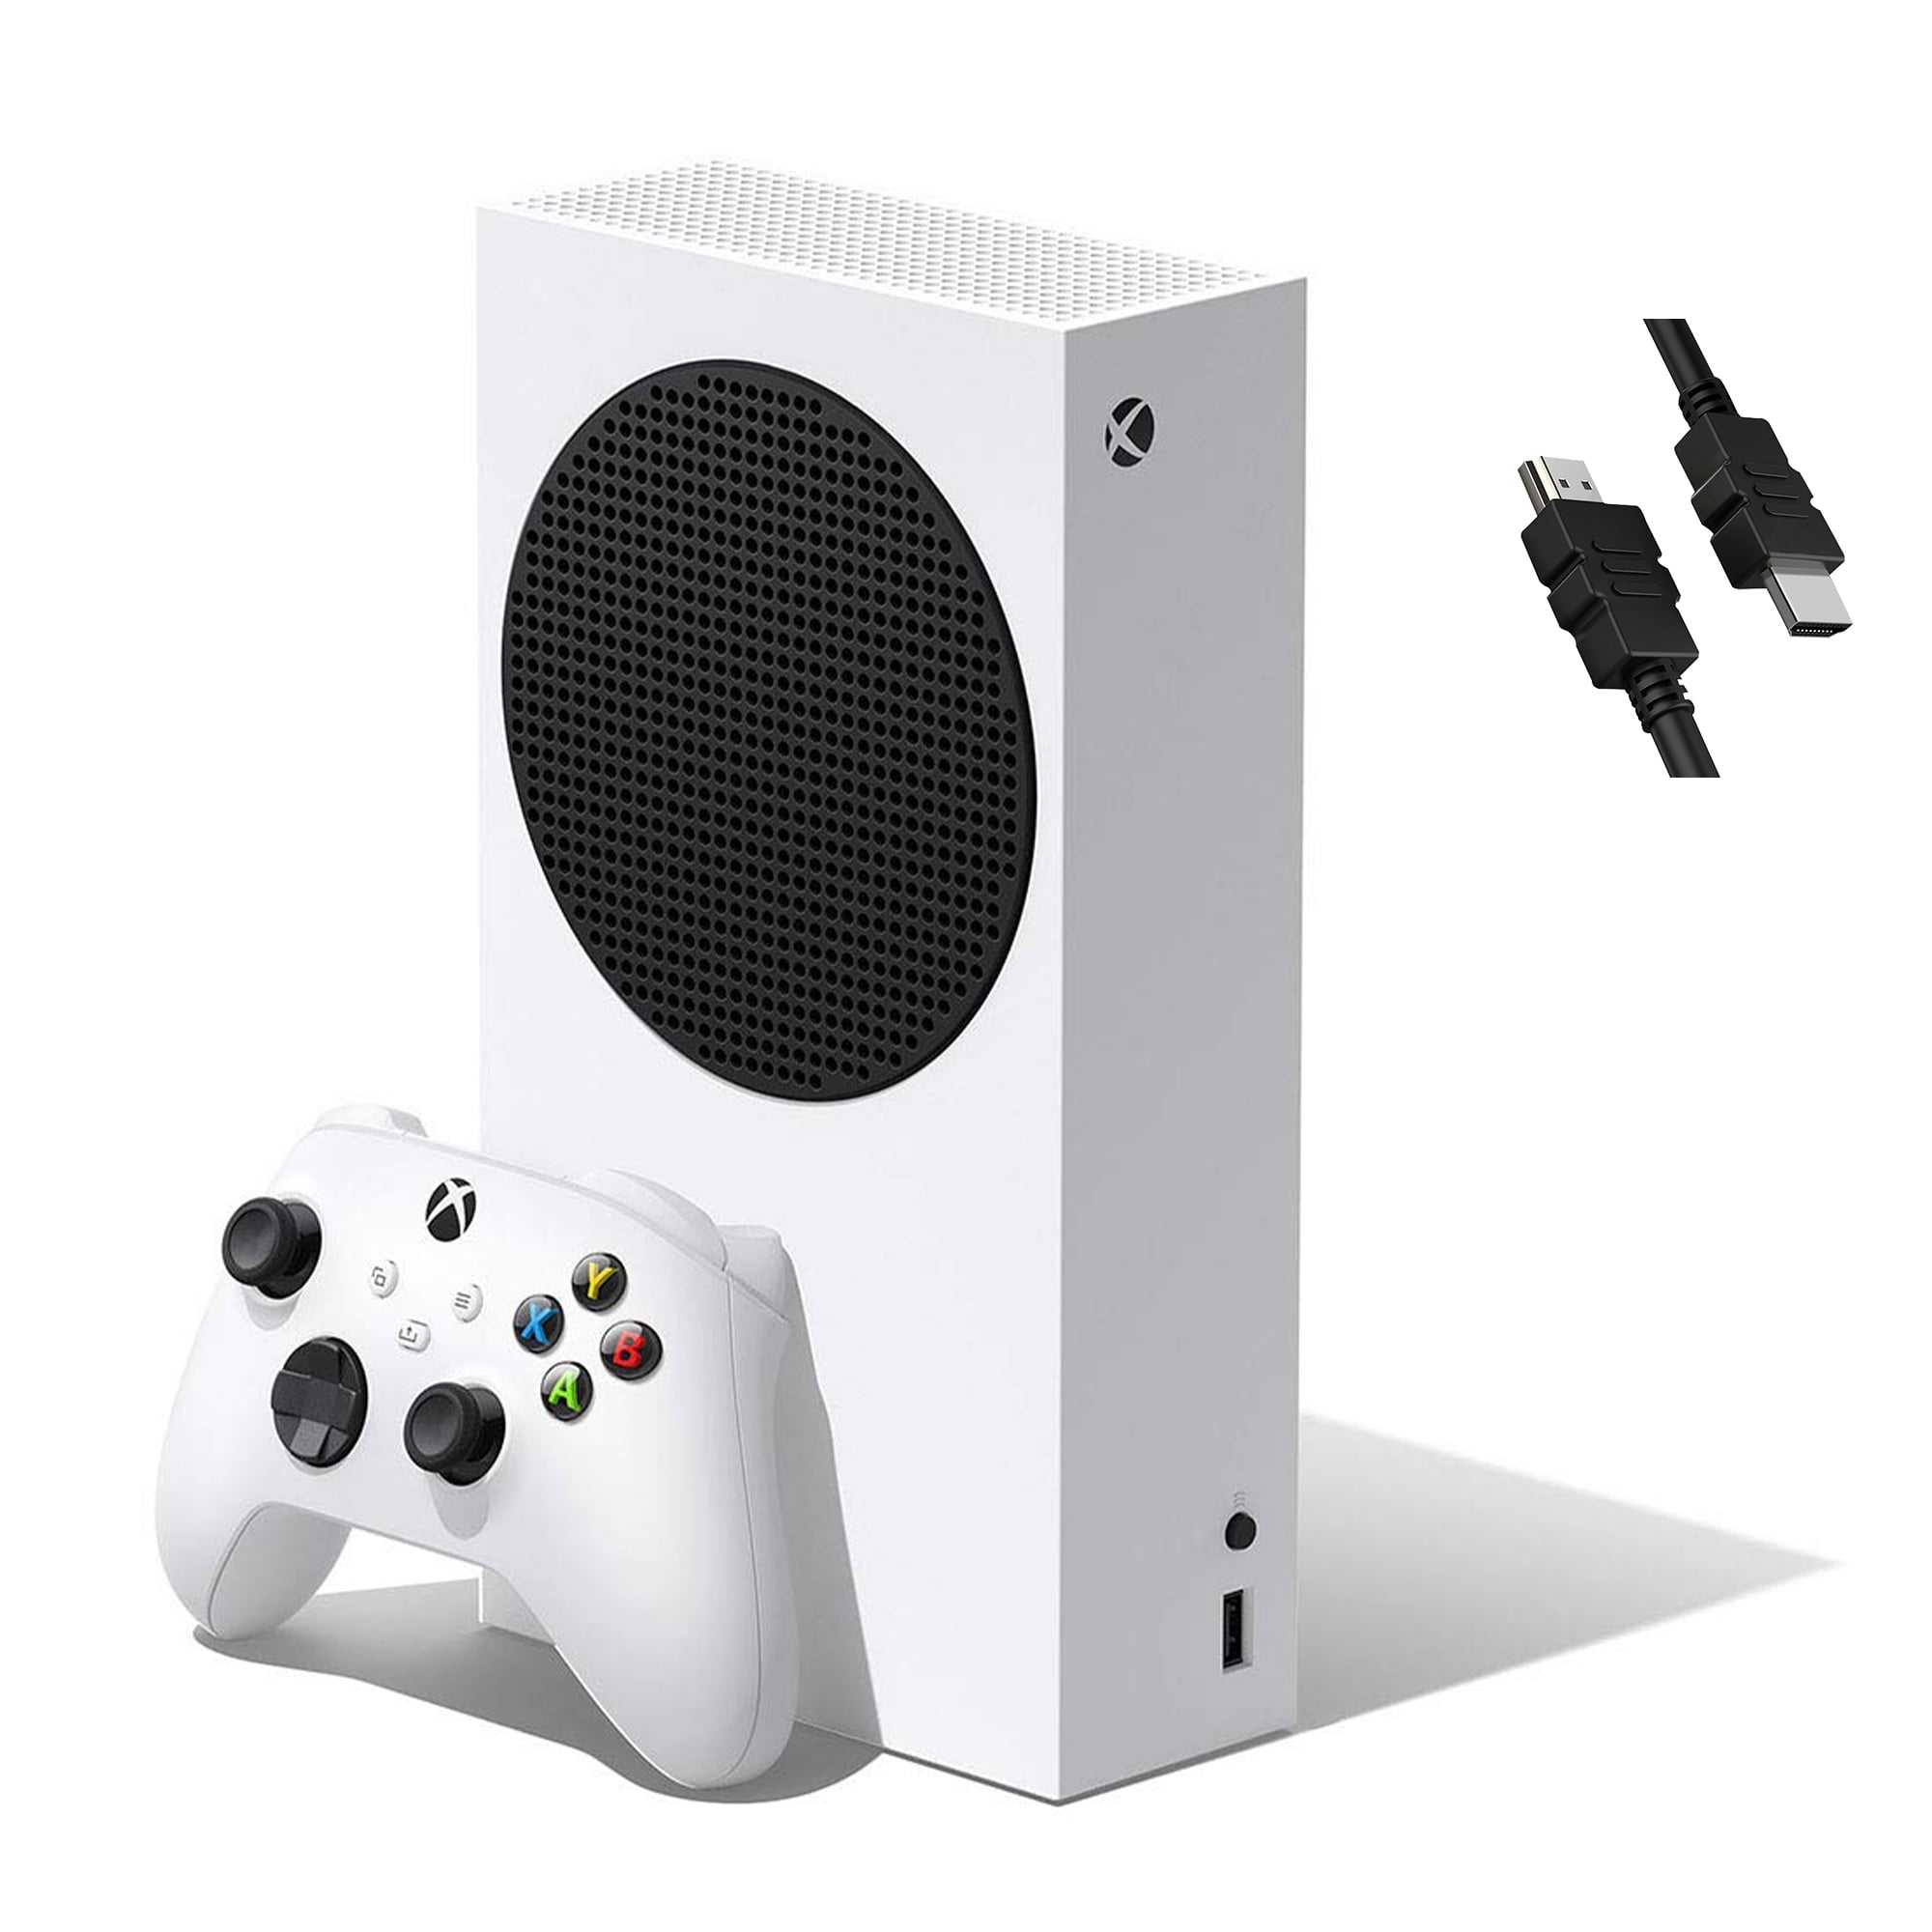 Microsoft Xbox Series S 512GB SSD All-Digital Console (Disc-free Gaming), Wireless Controller, DTS Audio, Dynamic Range), Up to 120 FPS, 1440p Gaming Resolution, AMD FreeSync (HDMI Cable) - Walmart.com